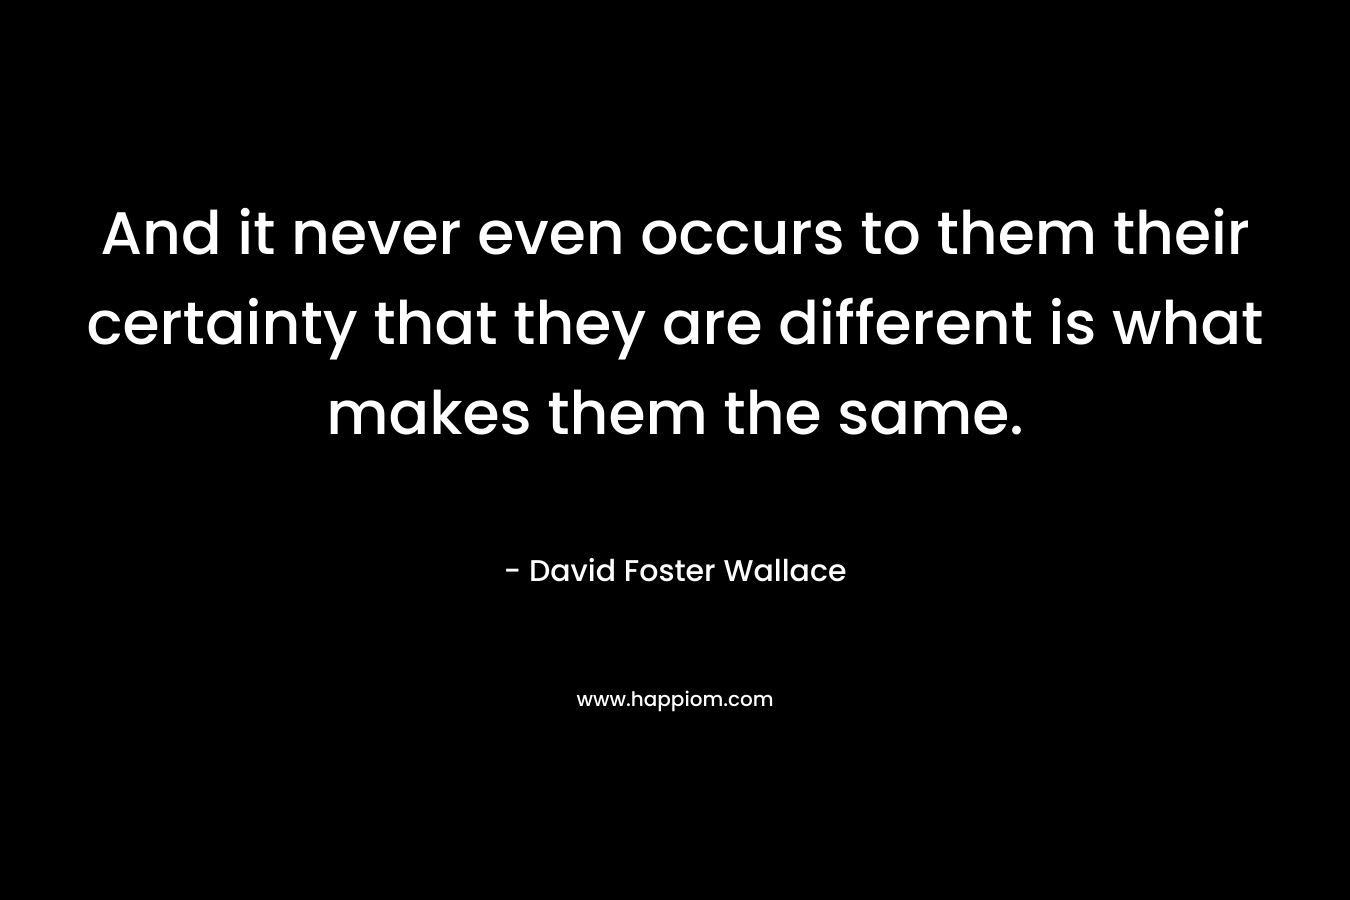 And it never even occurs to them their certainty that they are different is what makes them the same. – David Foster Wallace